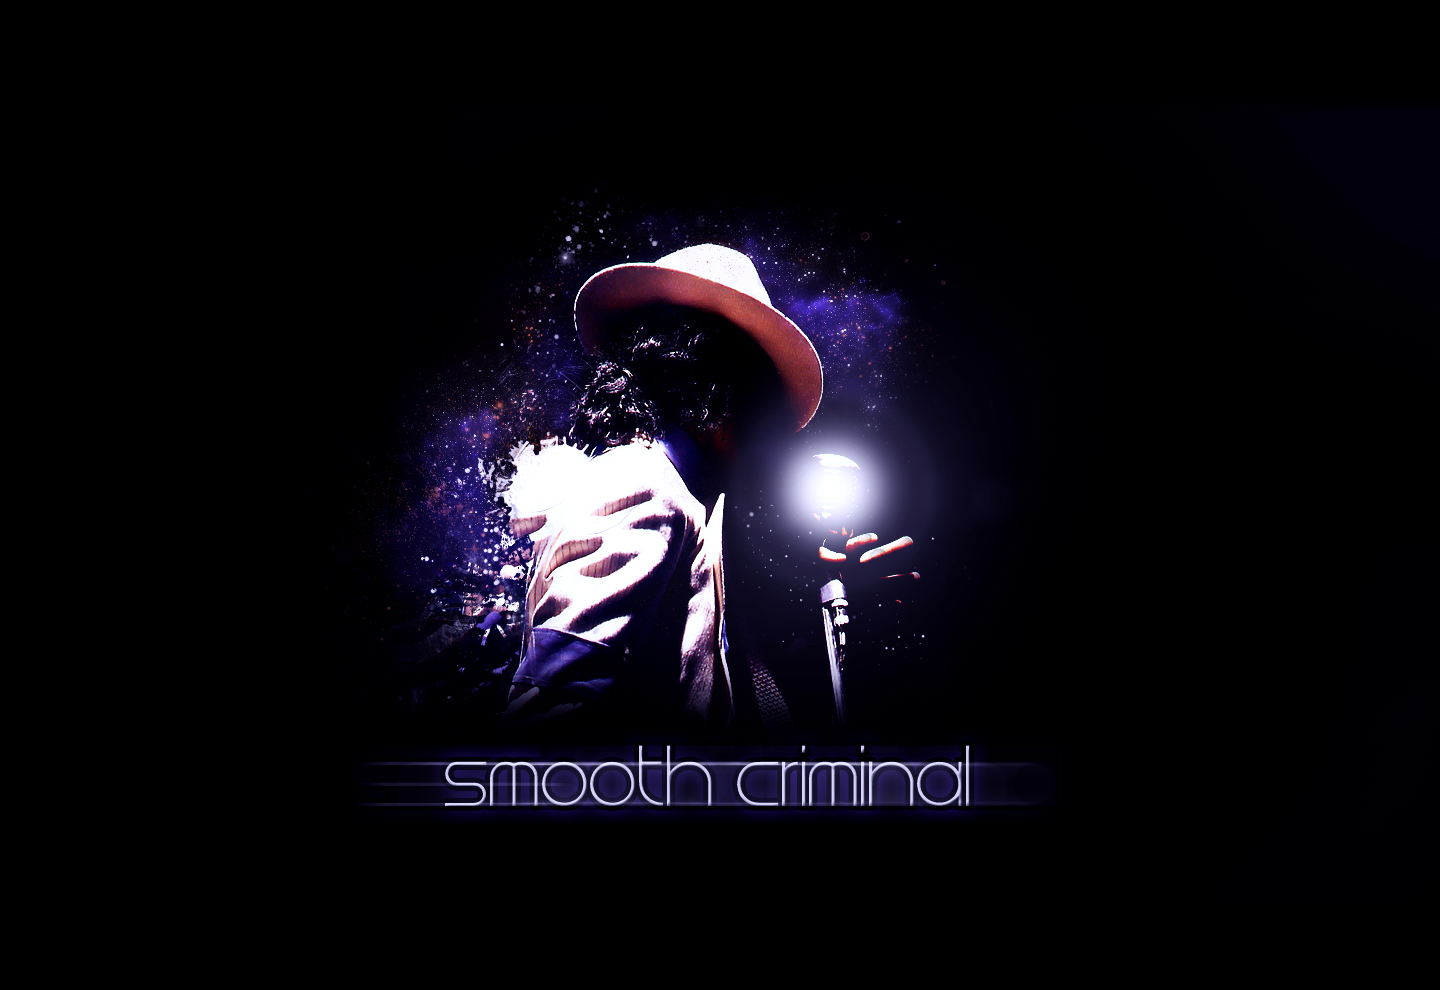 Smooth Criminal Wallpaper 2 by Maxoooow on